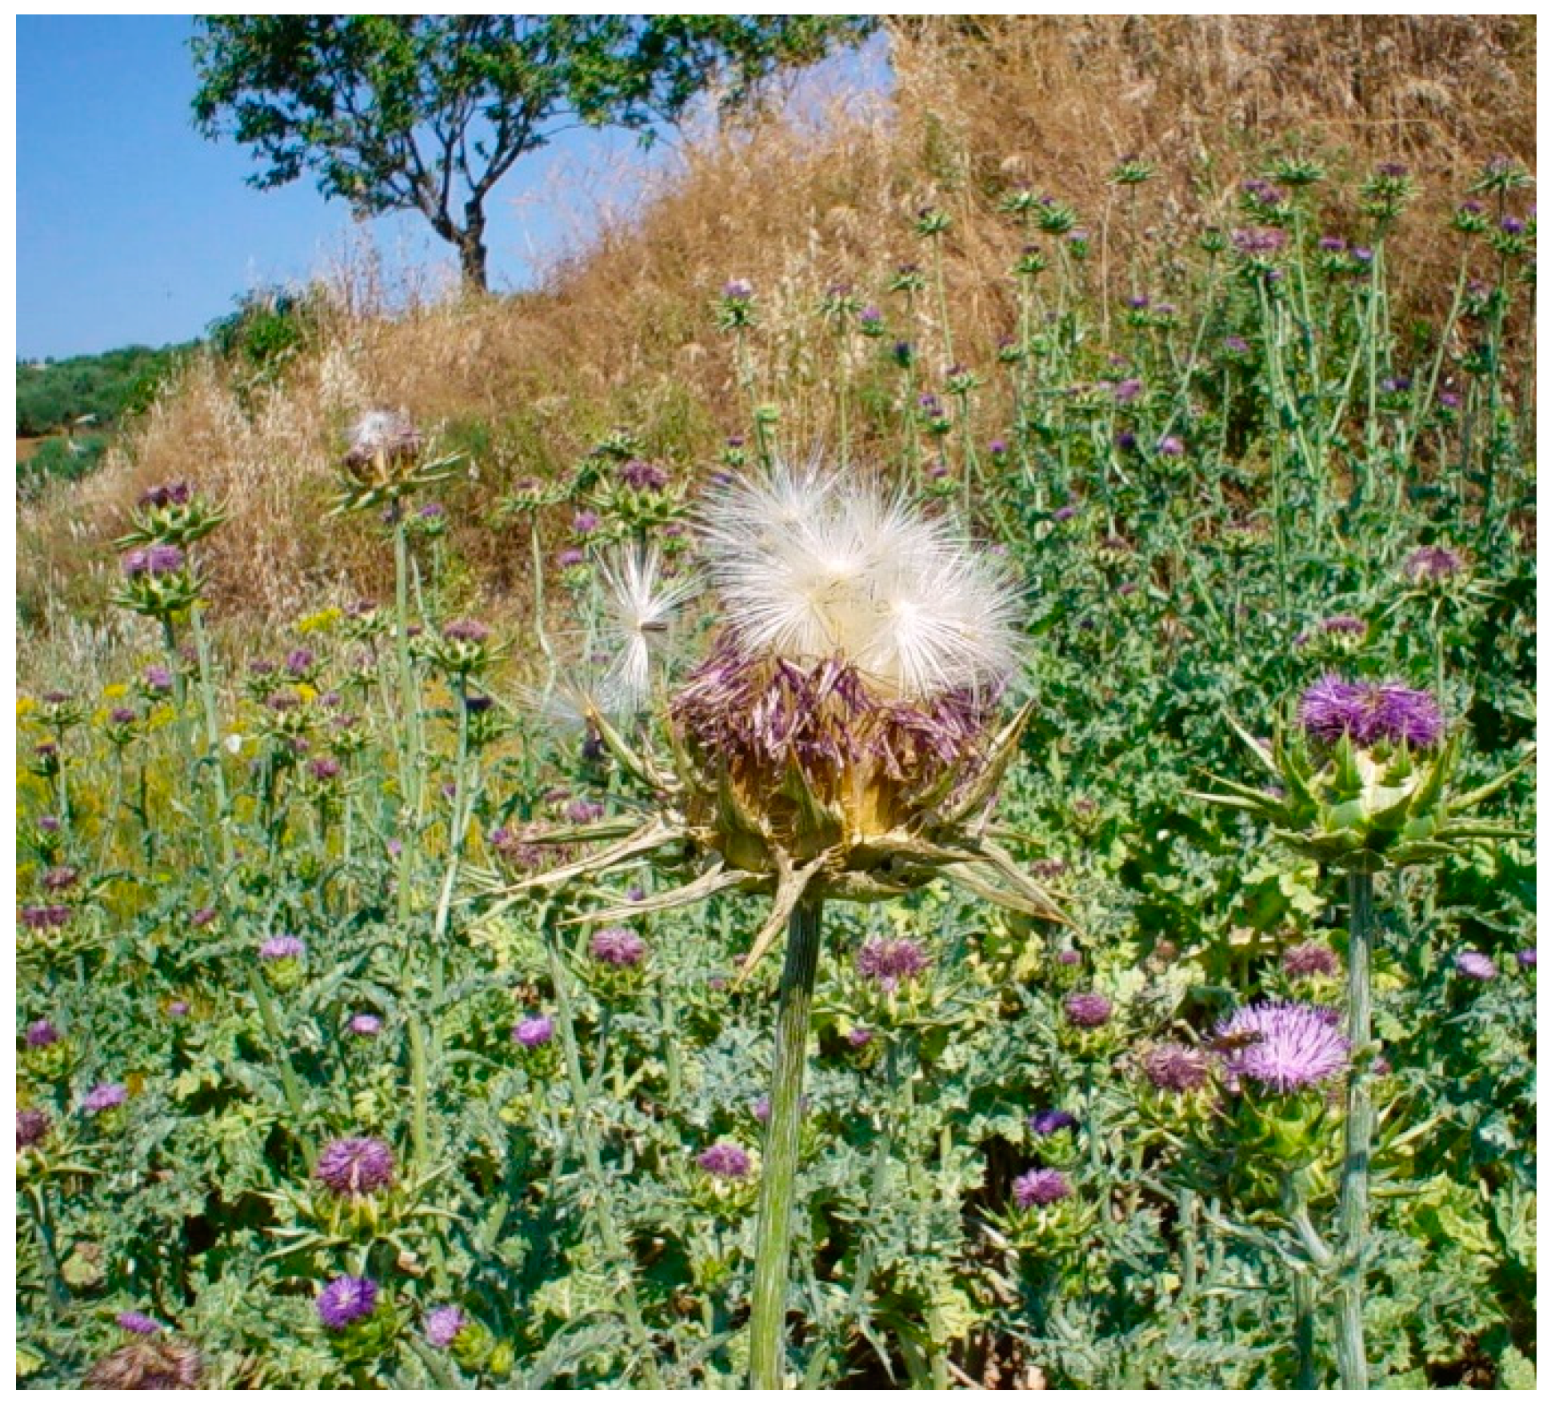 Agronomy | Free Full-Text | Milk Thistle (Silybum Marianum L.) as a Novel  Multipurpose Crop for Agriculture in Marginal Environments: A Review | HTML